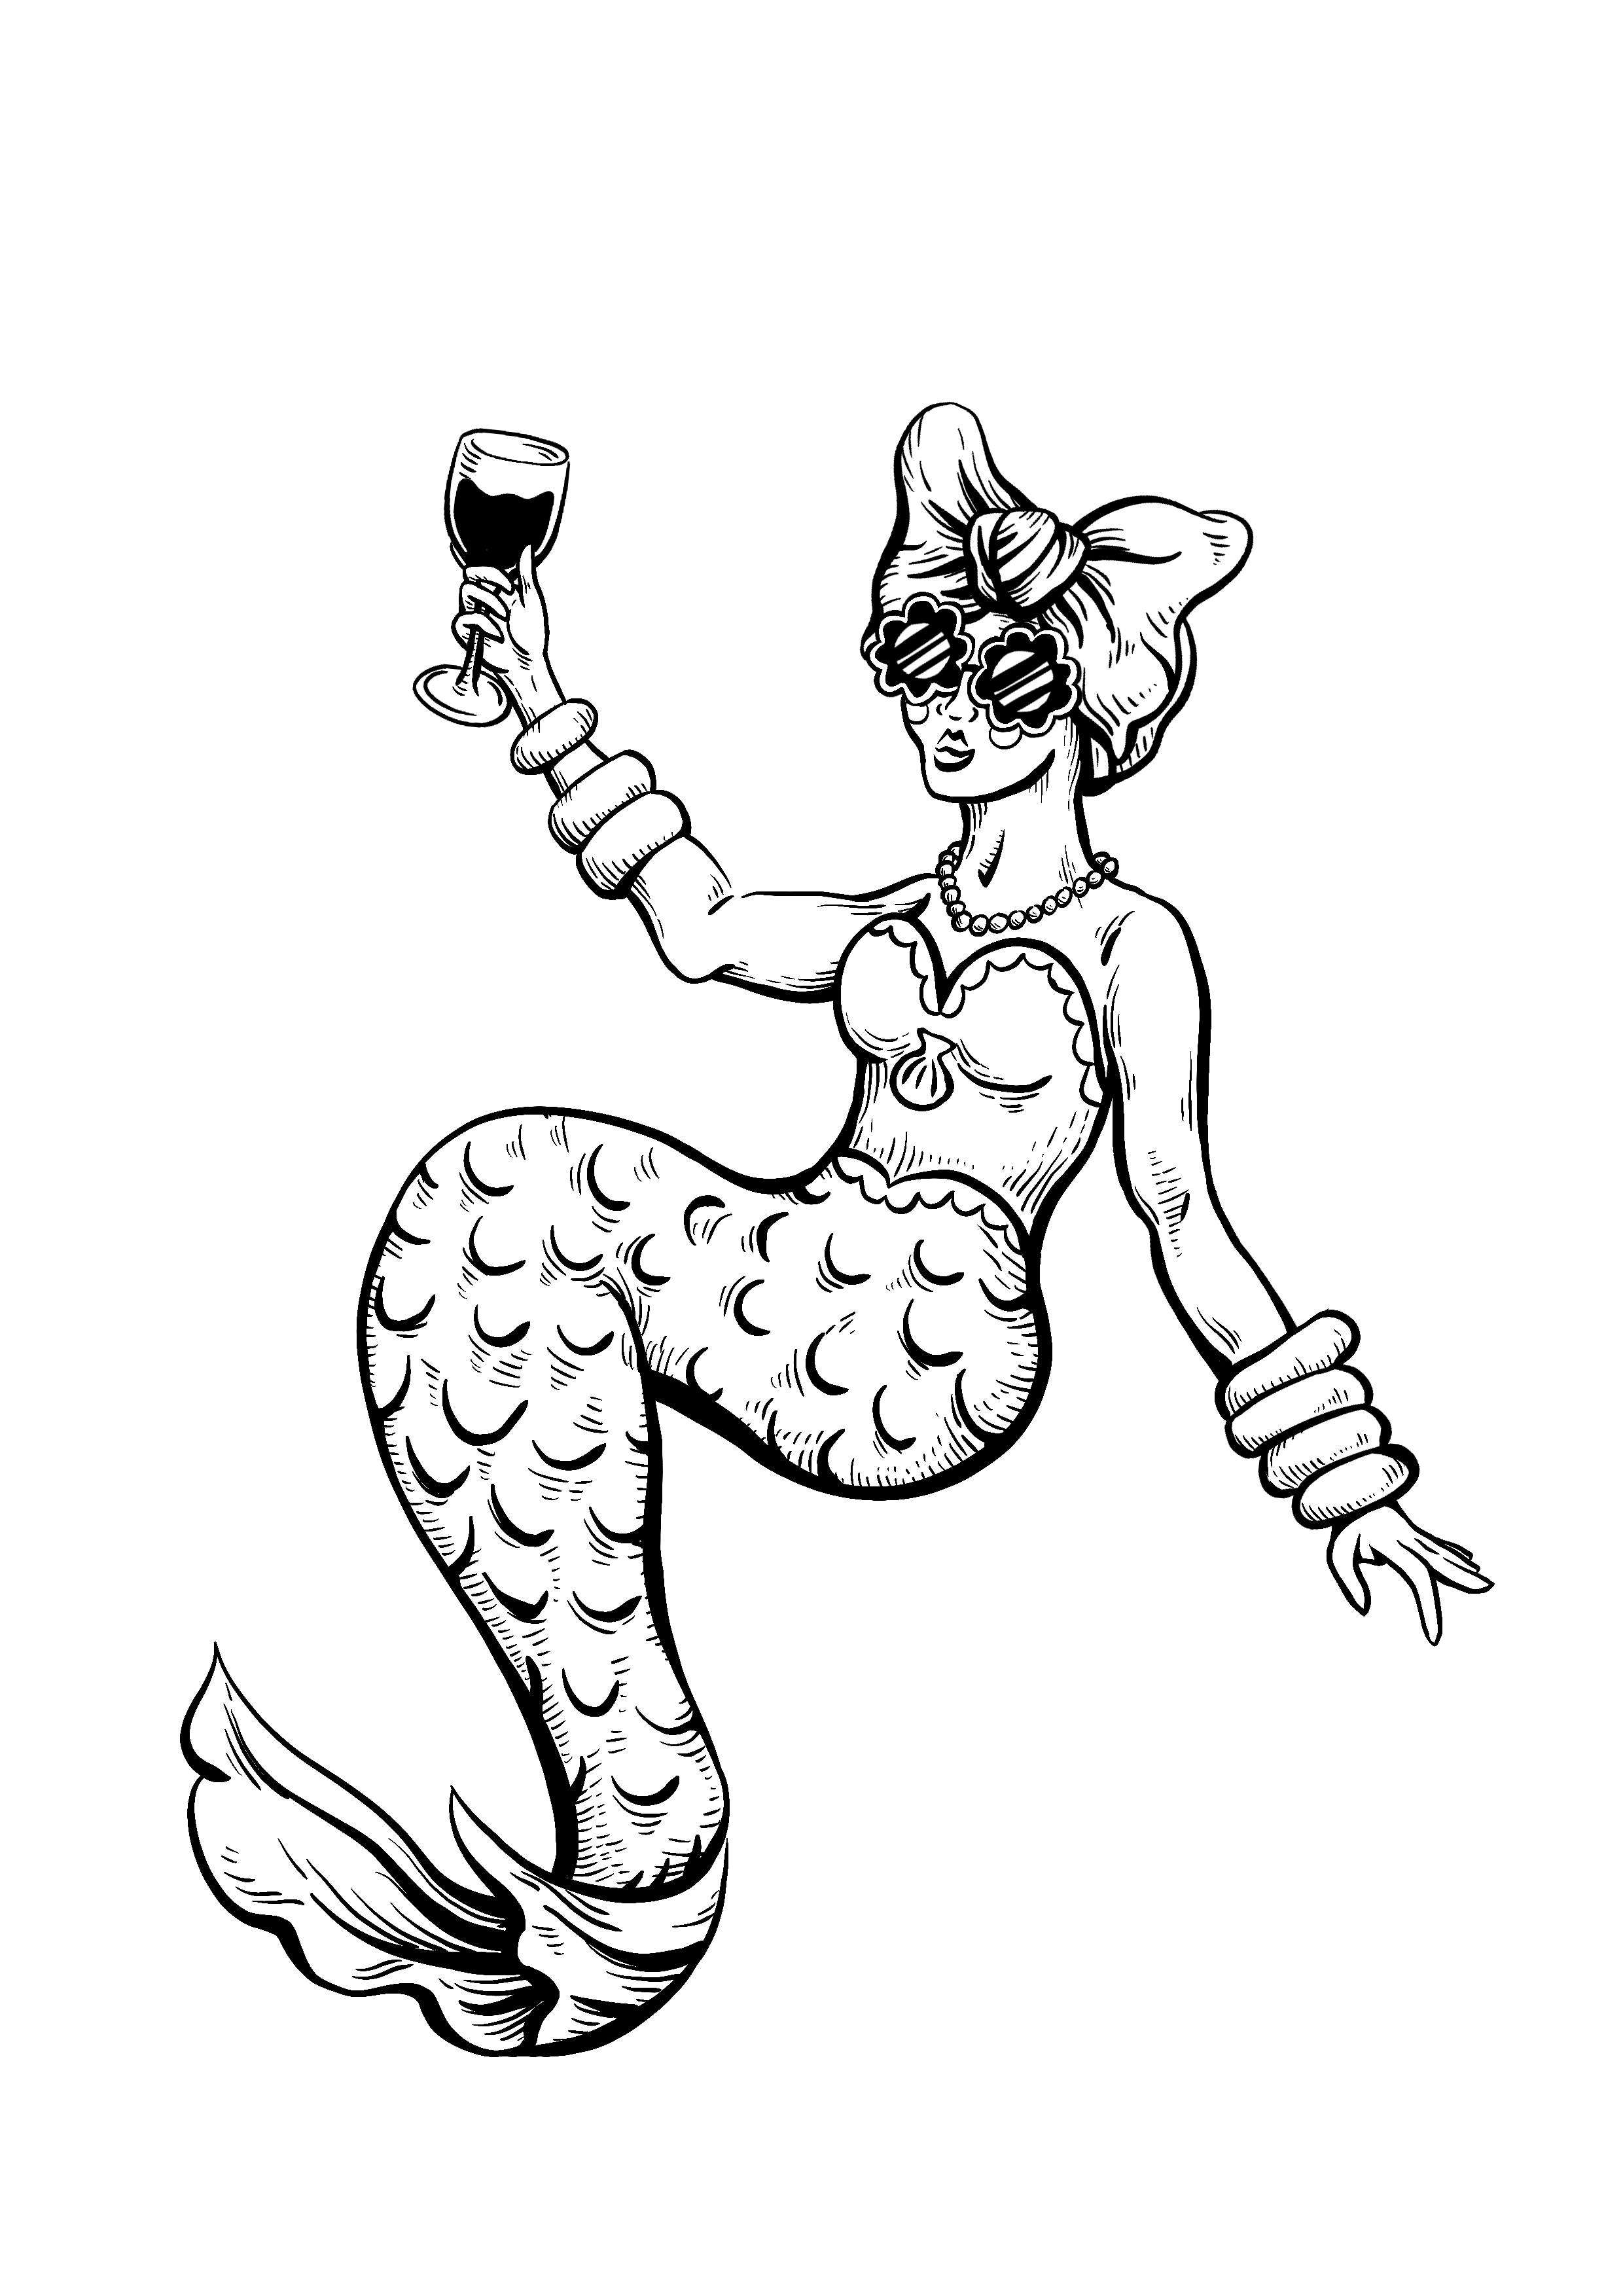 COOGEE_The Wine Drinker 1.png